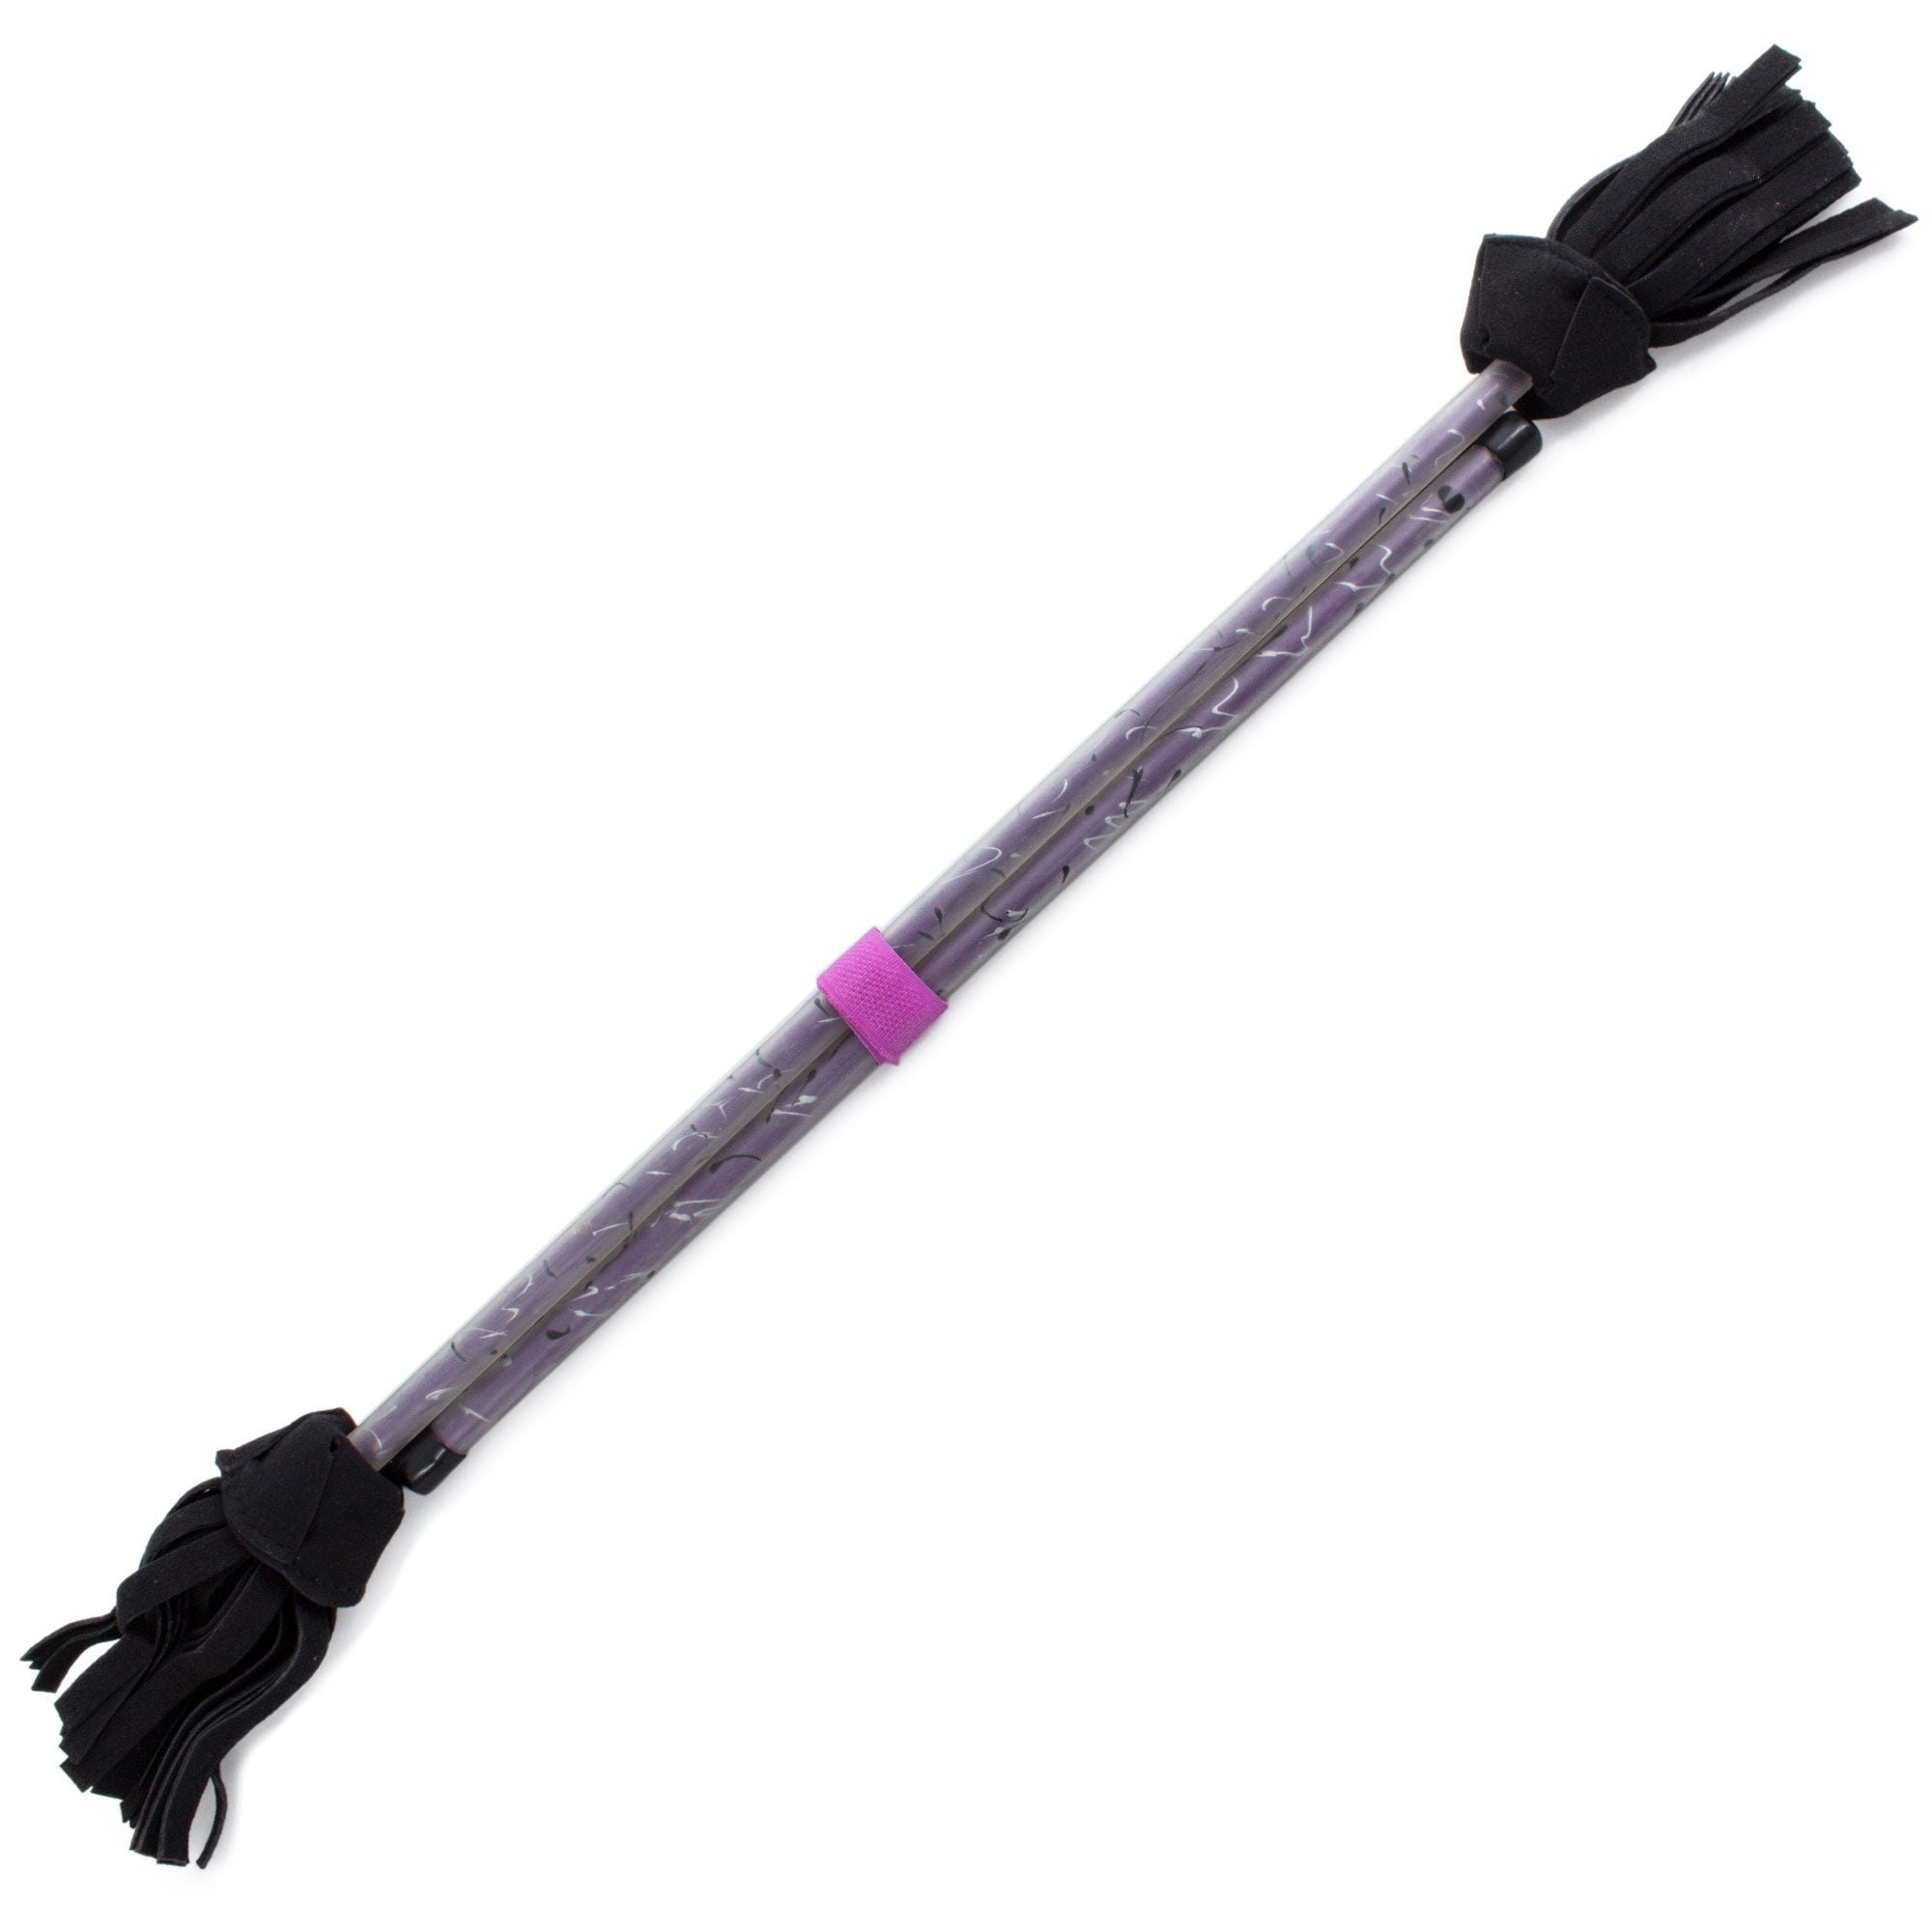 purple picasso flower stick and hand sticks strapped together